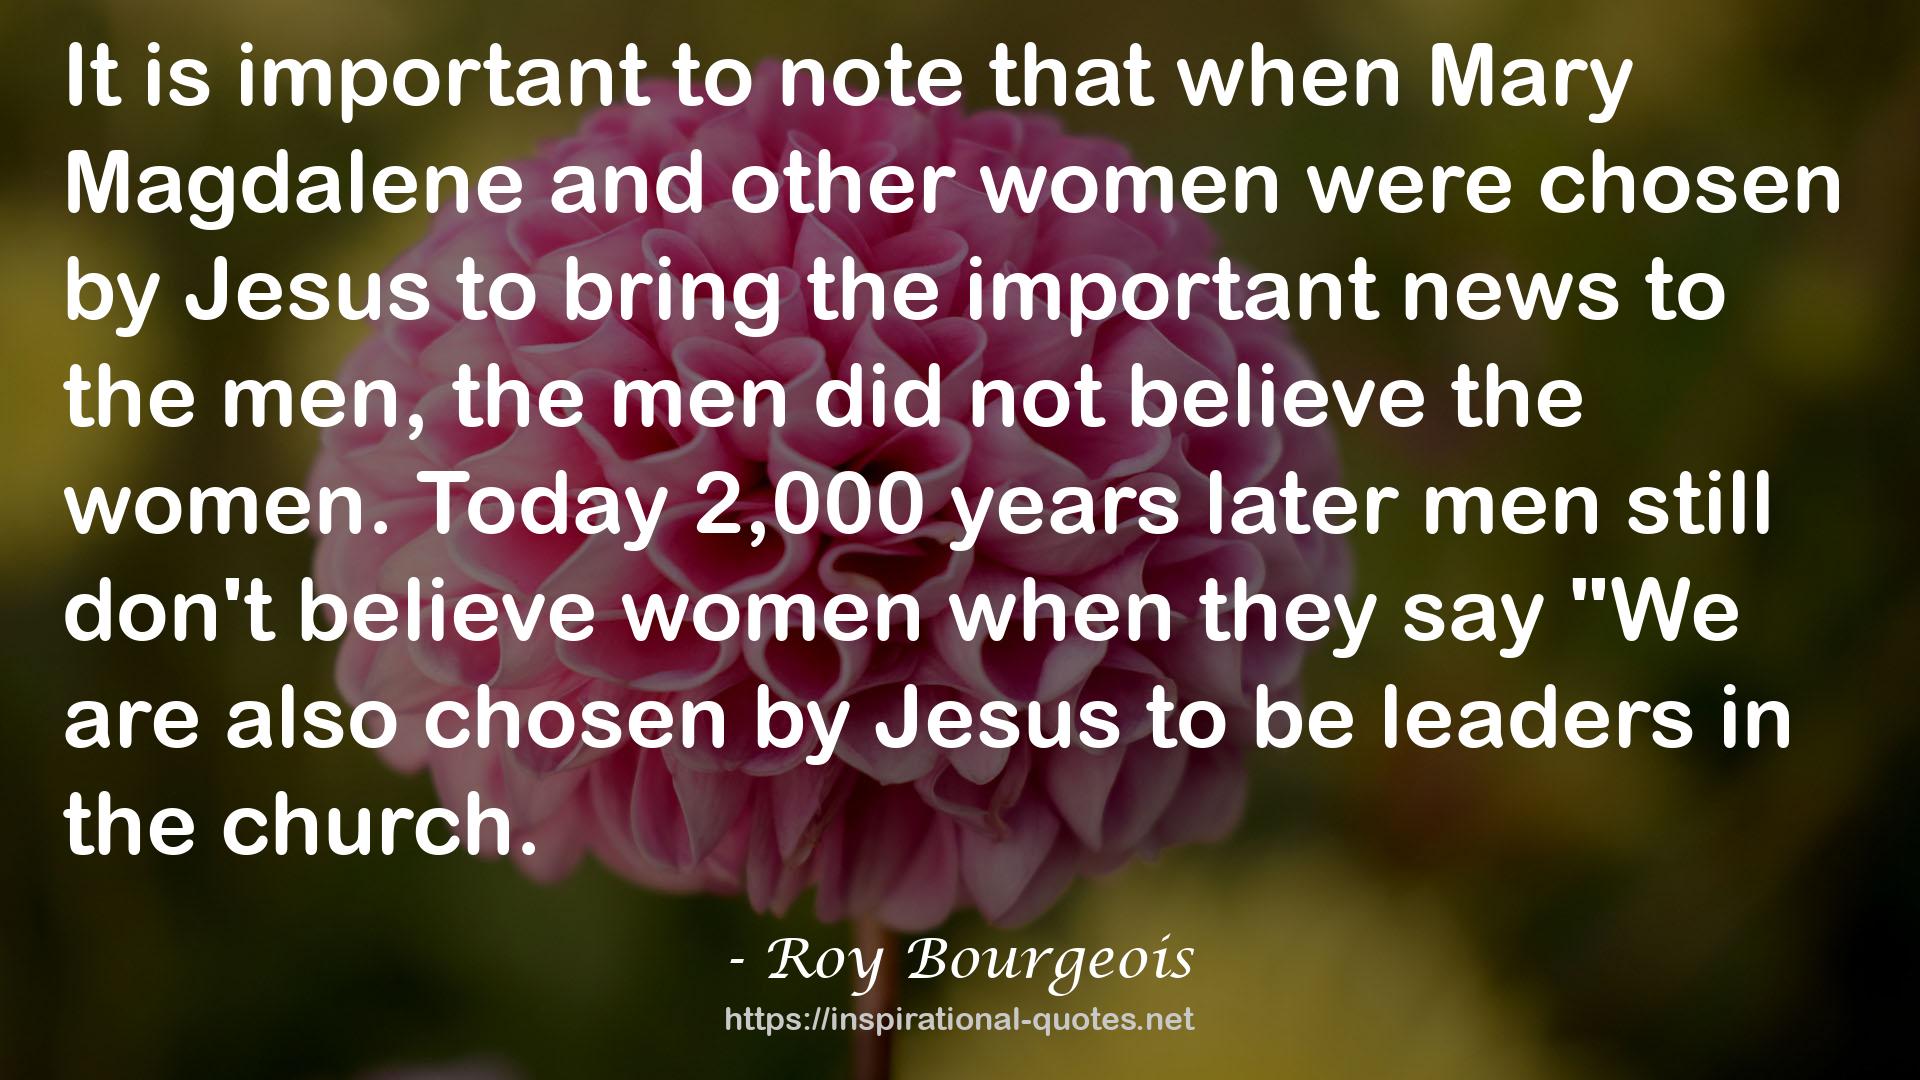 Roy Bourgeois QUOTES